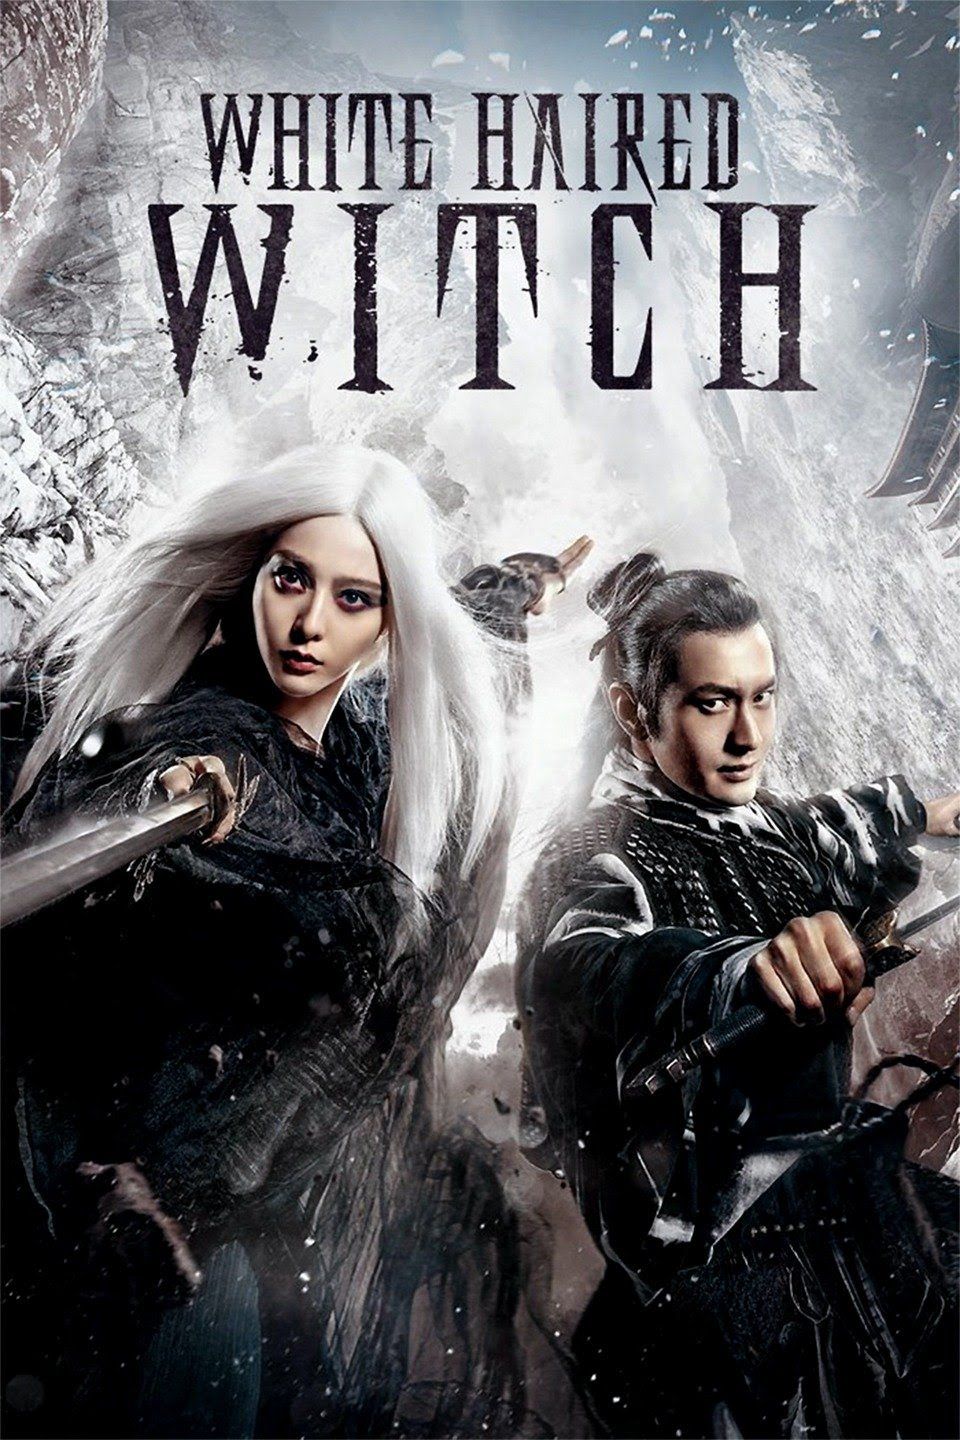 The White Haired Witch of Lunar Kingdom (2014) Hindi Dubbed BluRay download full movie